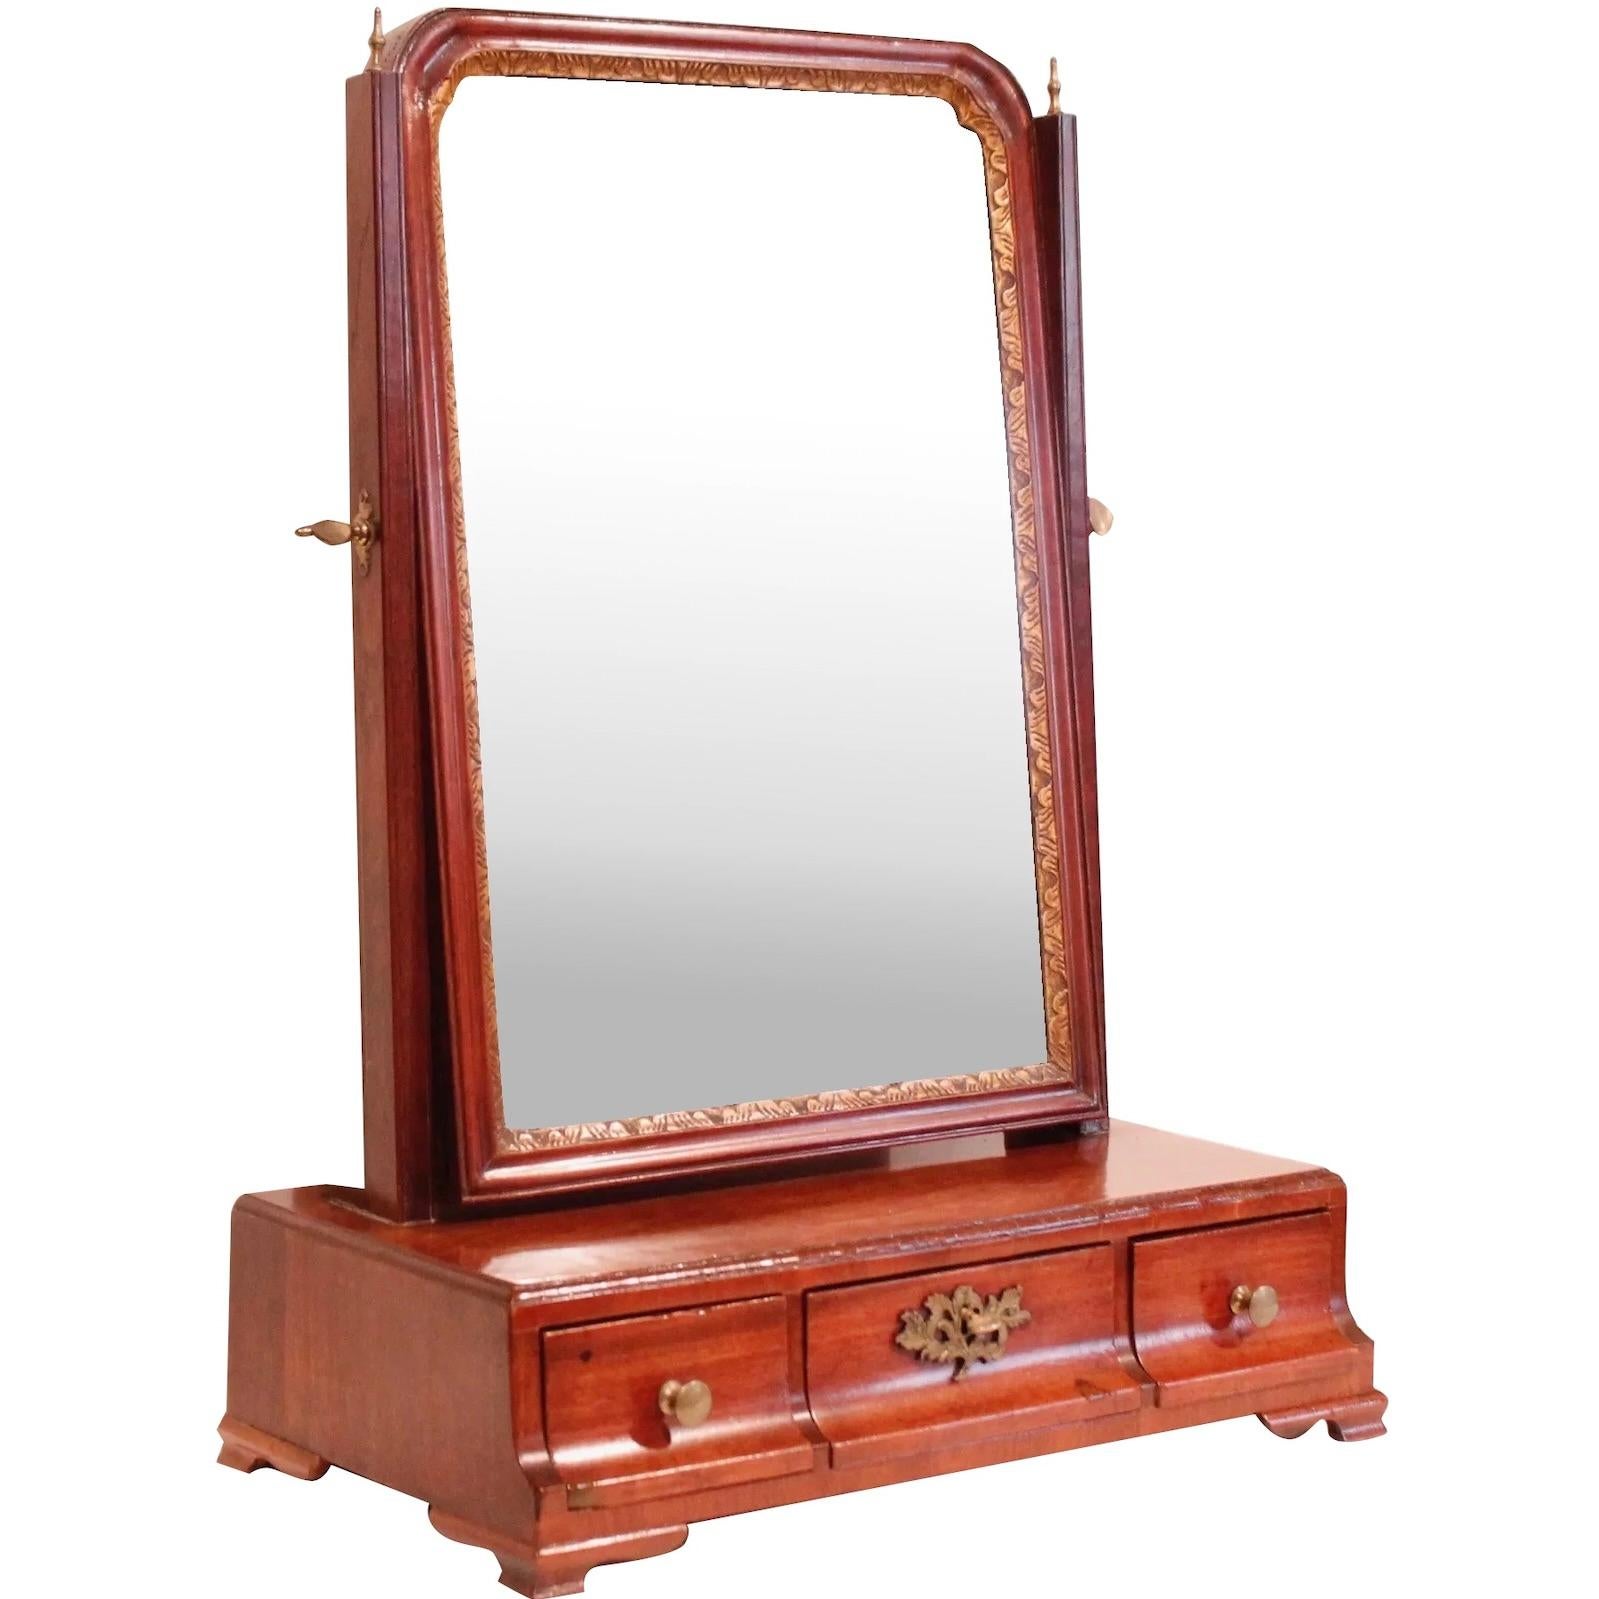 A George II/George III walnut mirror on stand, the stand on bracket feet with three drawers, and mirror panel that pivots. Retains original hardware with a particularly nice central brass escutcheon plate. Ca. 1760-1780. Original mercury glass